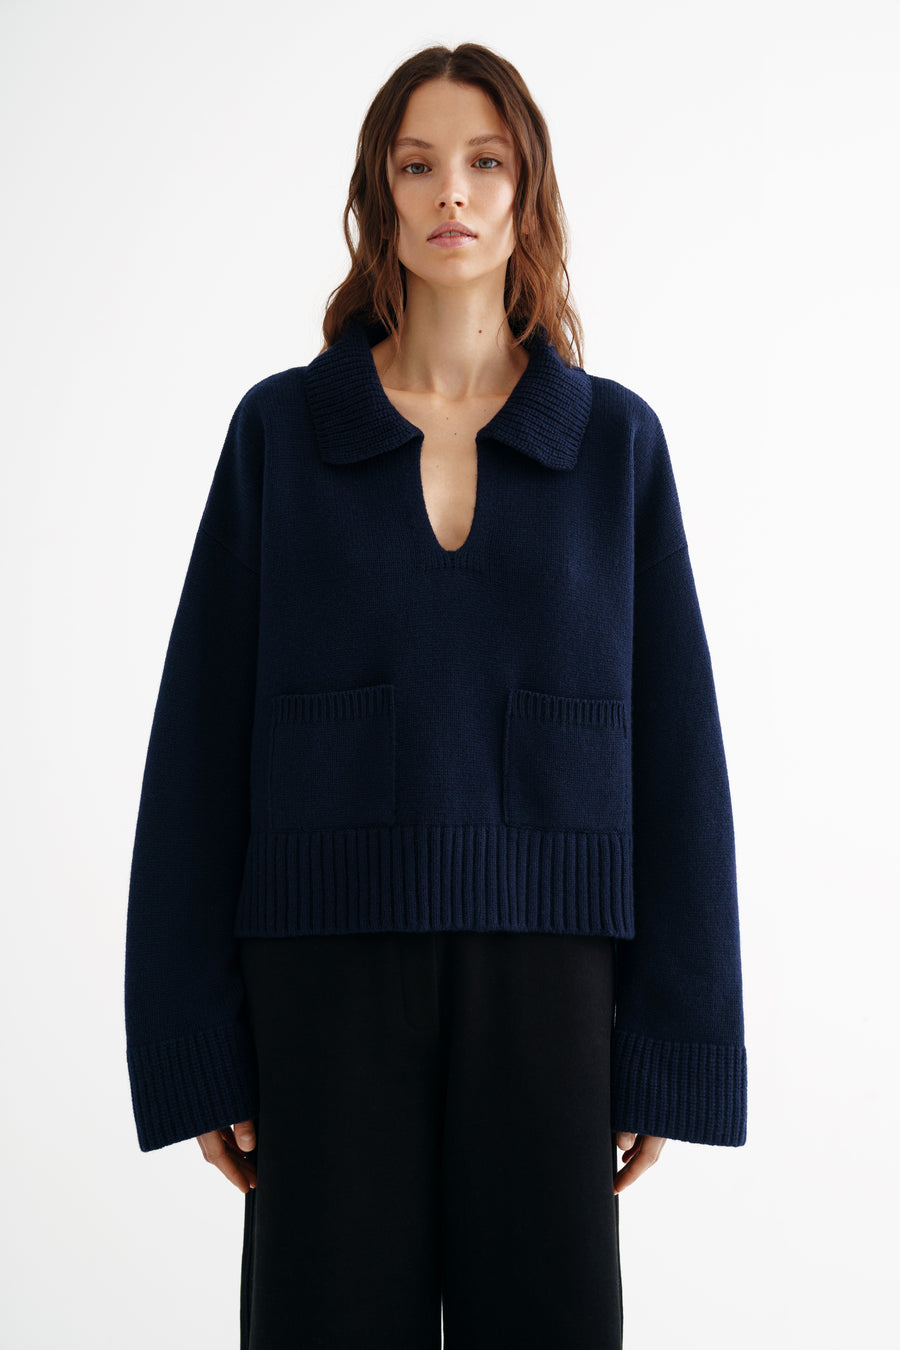 POLO SWEATER WITH POCKETS NAVY